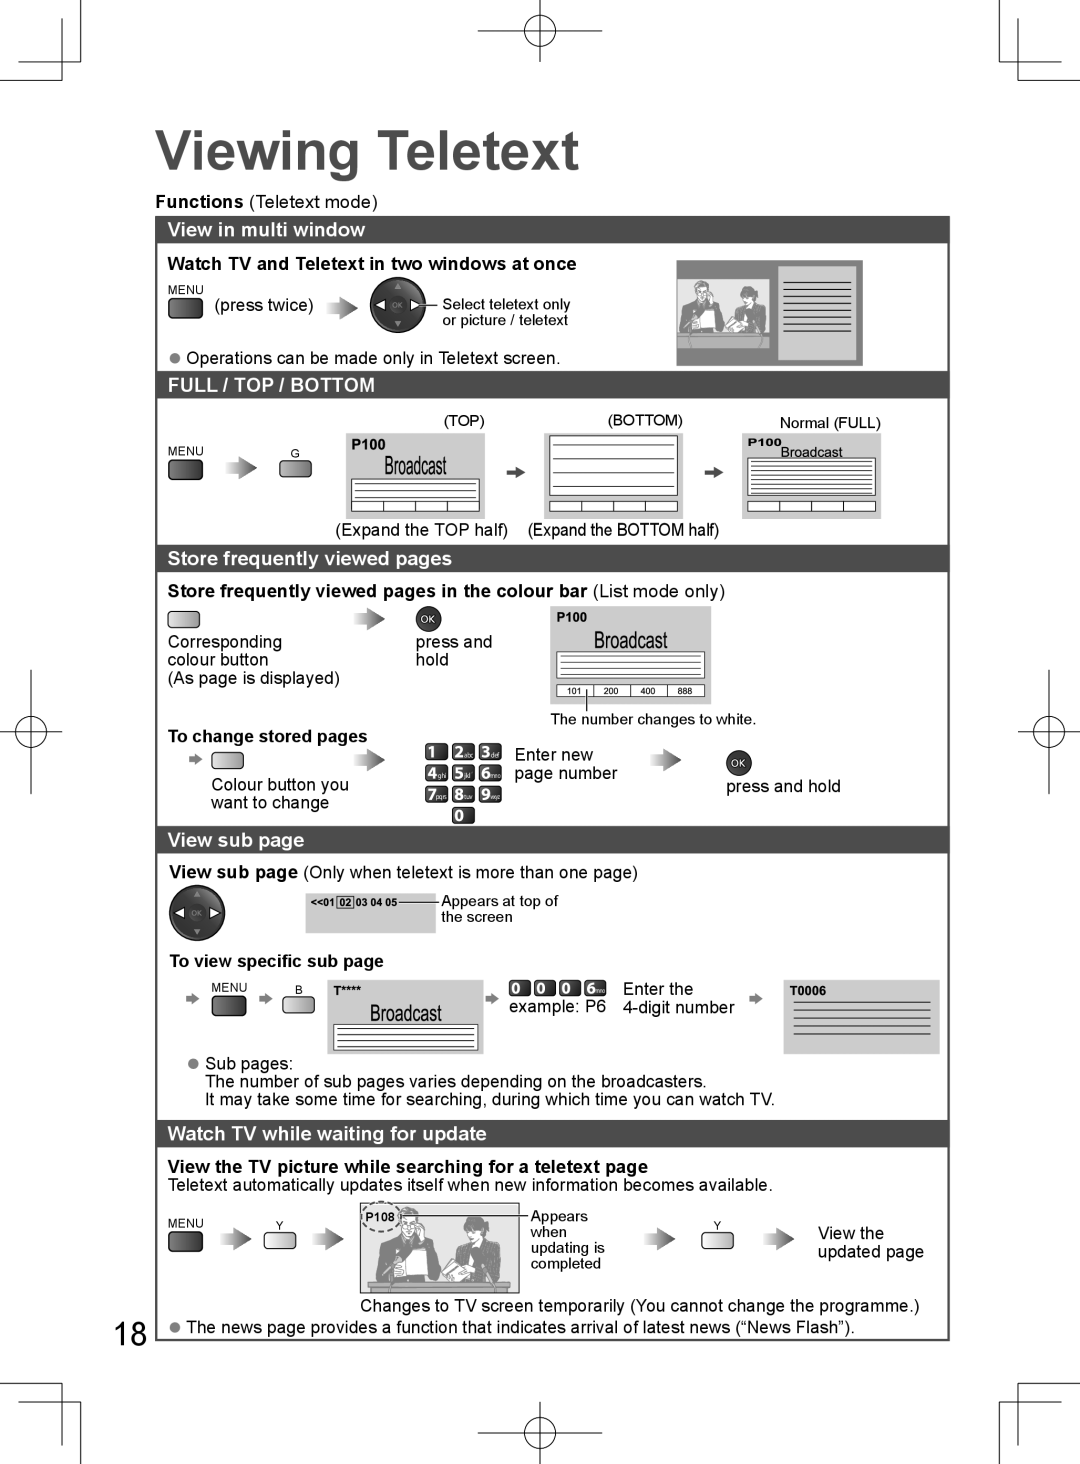 Panasonic TH-L32D25M manual View in multi window, Full / Top / Bottom, Store frequently viewed pages, View sub page 